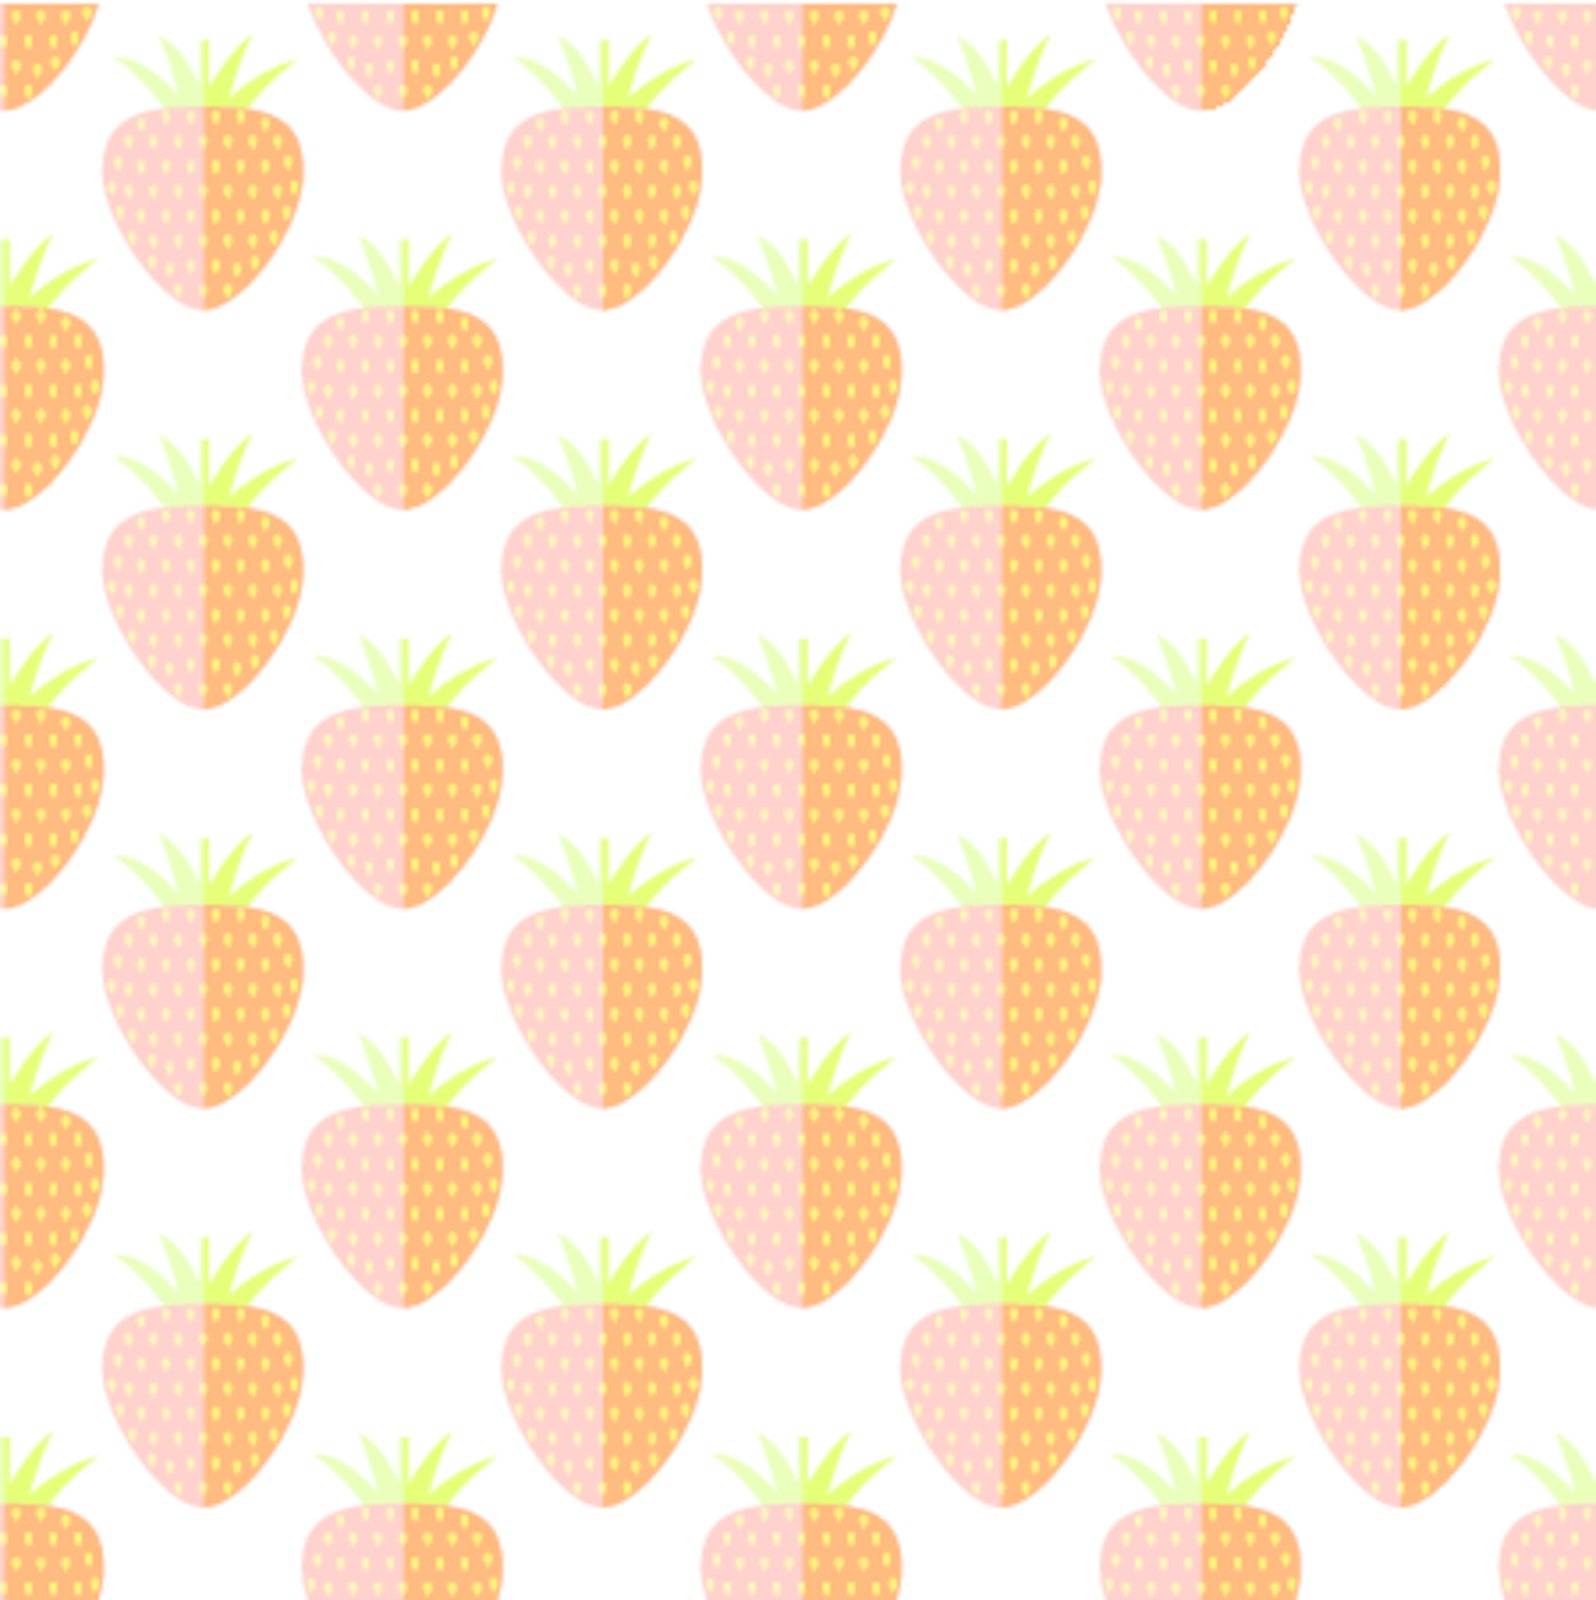 Flat strawberry cute seamless pattern in vintage style